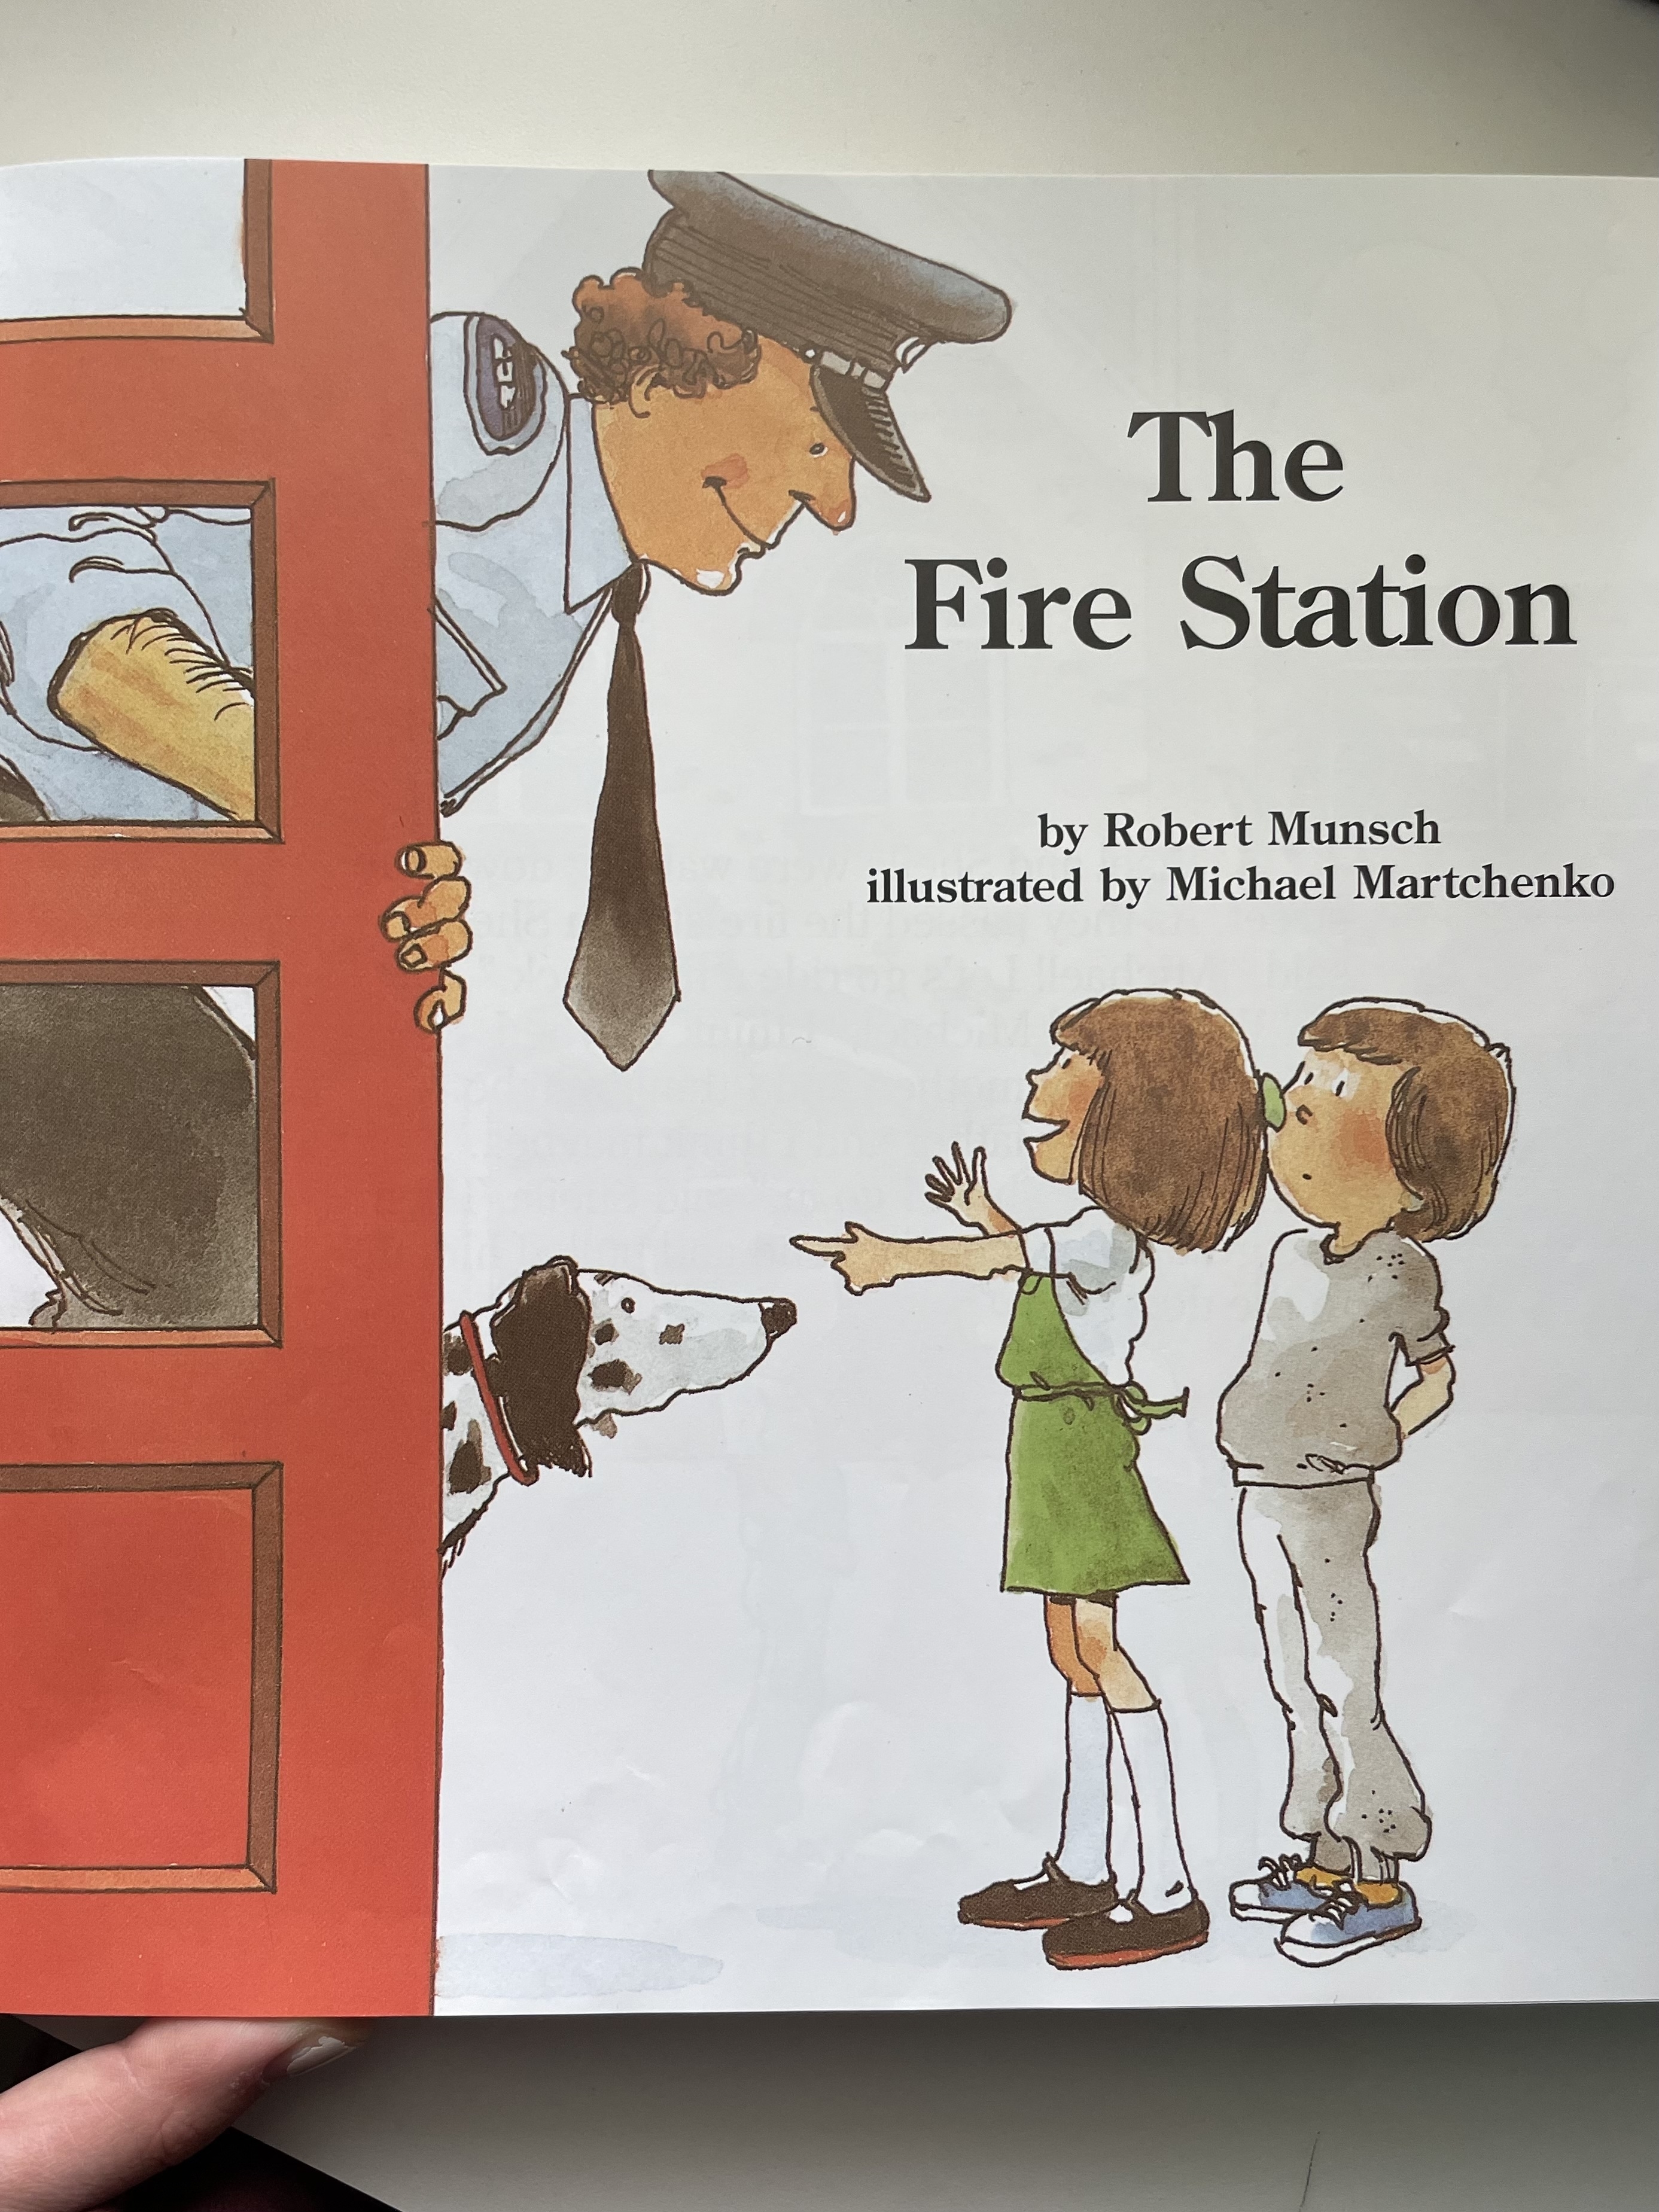 Cover of &quot;The Fire Station&quot; book showing an illustration of a firefighter, a Dalmatian dog, and two children